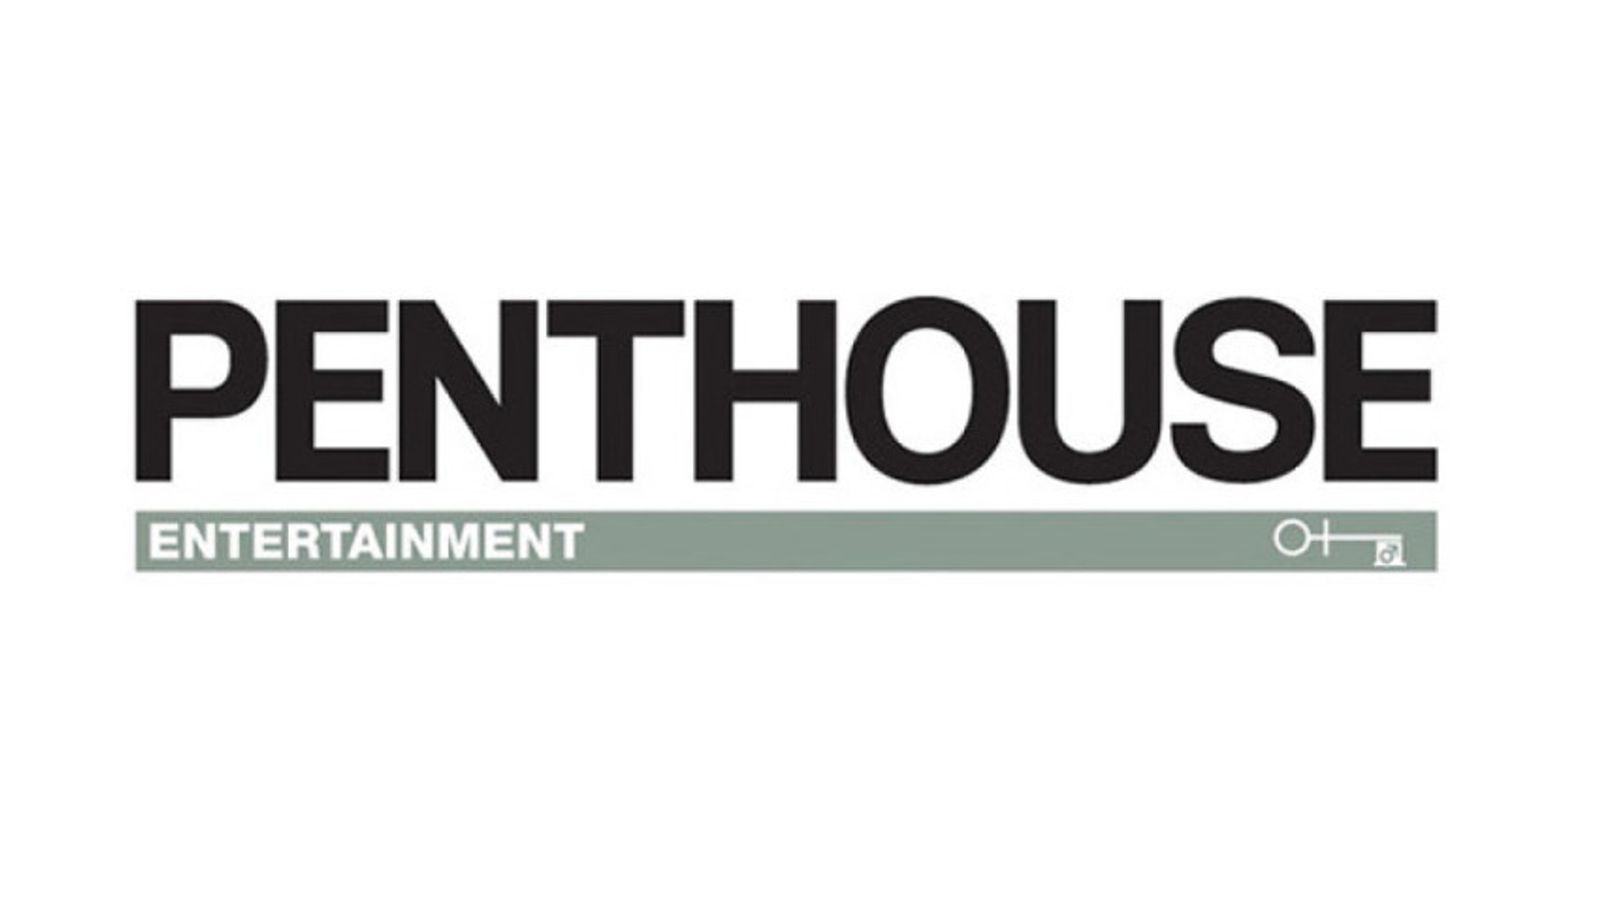 Penthouse Files for Chapter 11 Bankruptcy